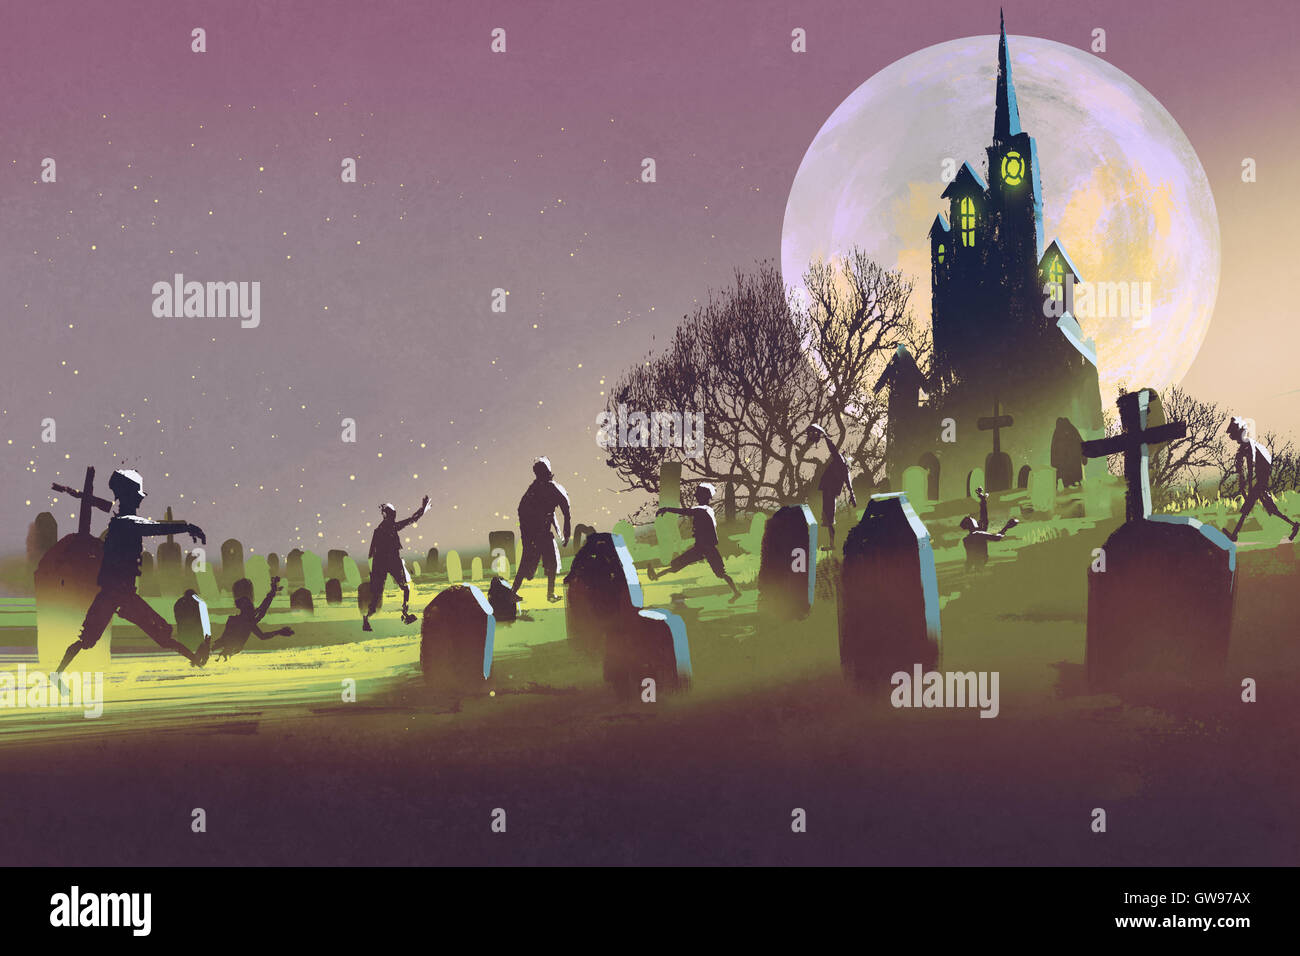 spooky castle,Halloween concept,cemetery with zombies at night,illustration painting Stock Photo